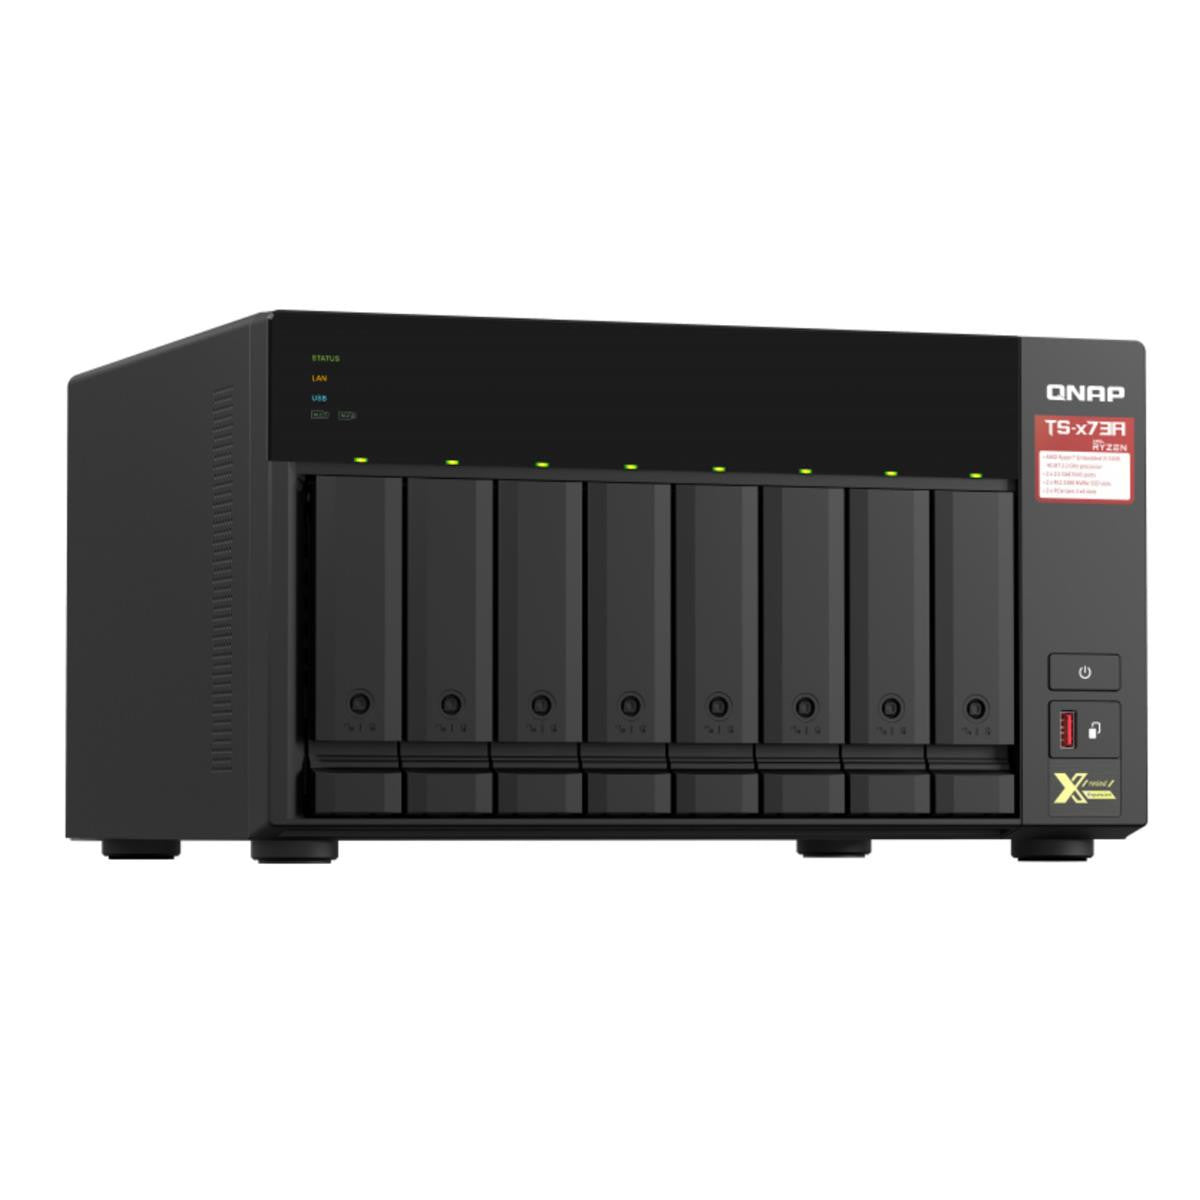 QNAP TS-873A 8-BAY NAS with 16GB DDR4 RAM and 48TB (8x6TB) Western Digital RED PLUS Drives Fully Assembled and Tested